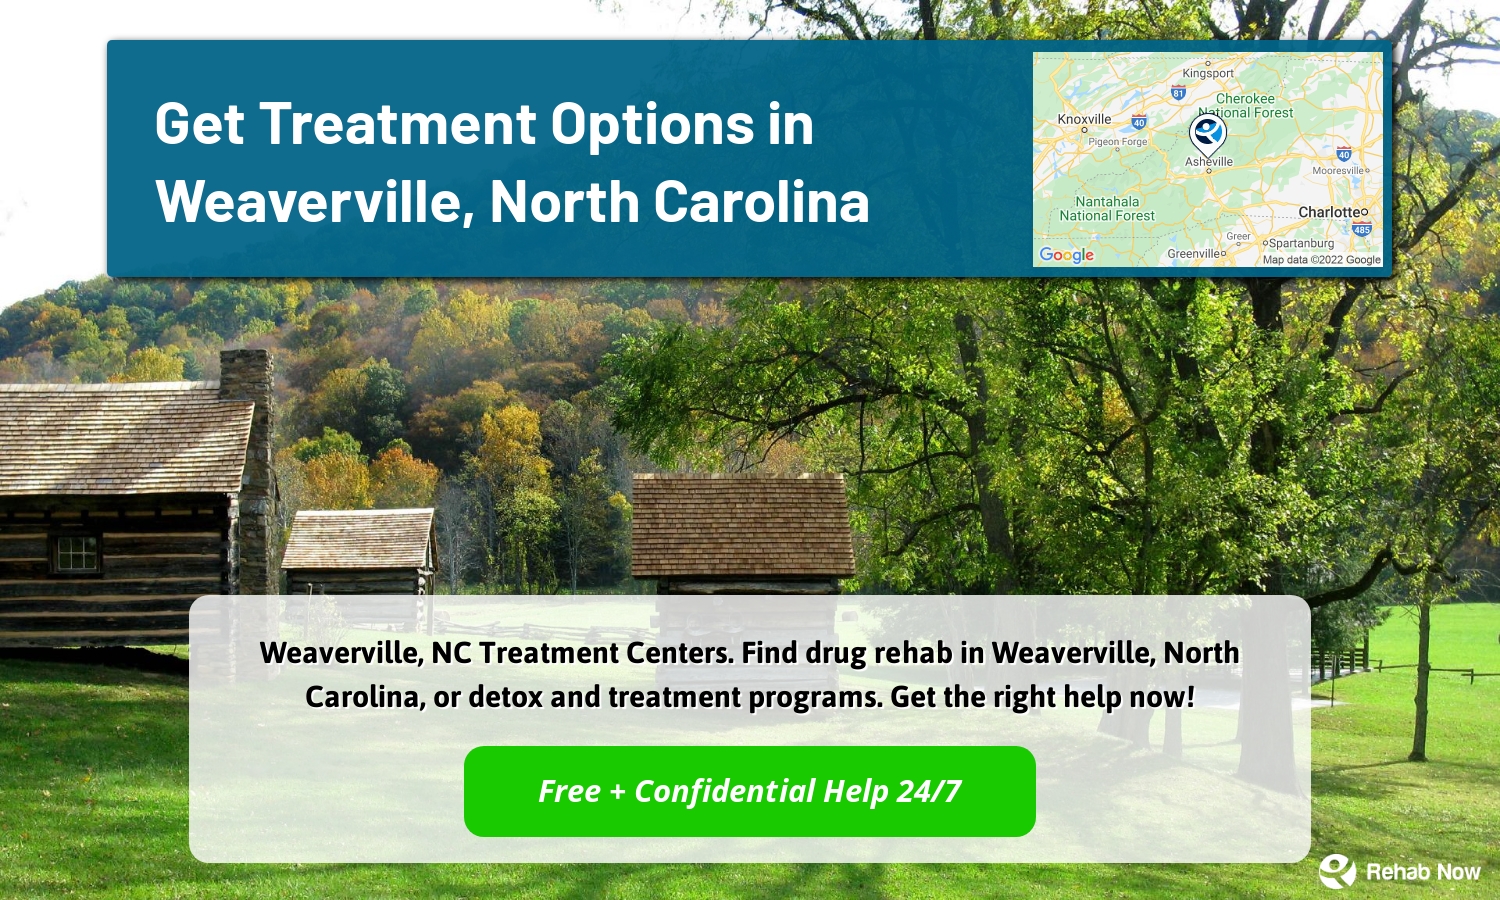 Weaverville, NC Treatment Centers. Find drug rehab in Weaverville, North Carolina, or detox and treatment programs. Get the right help now!